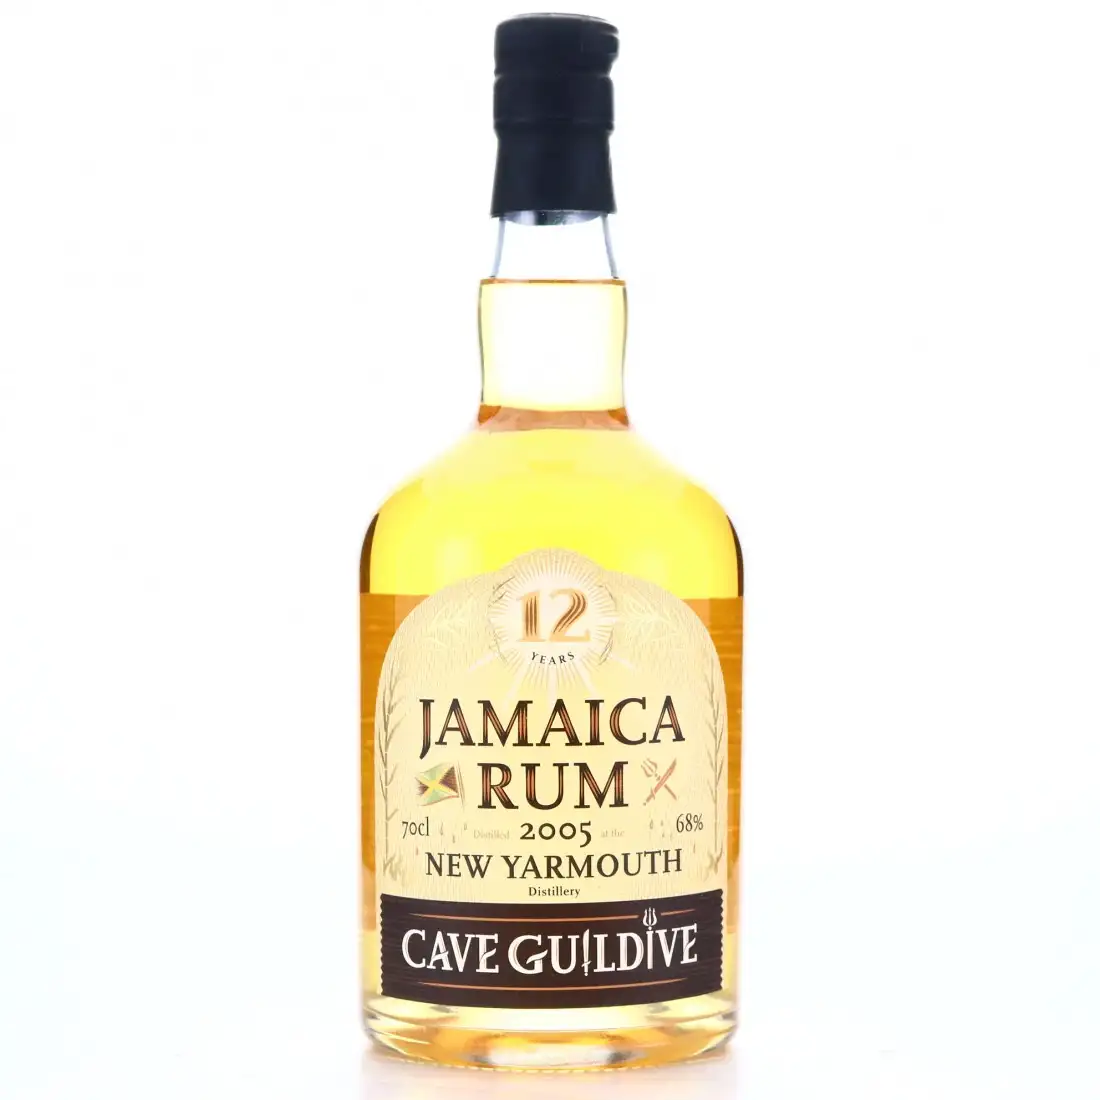 Image of the front of the bottle of the rum Jamaica Rum